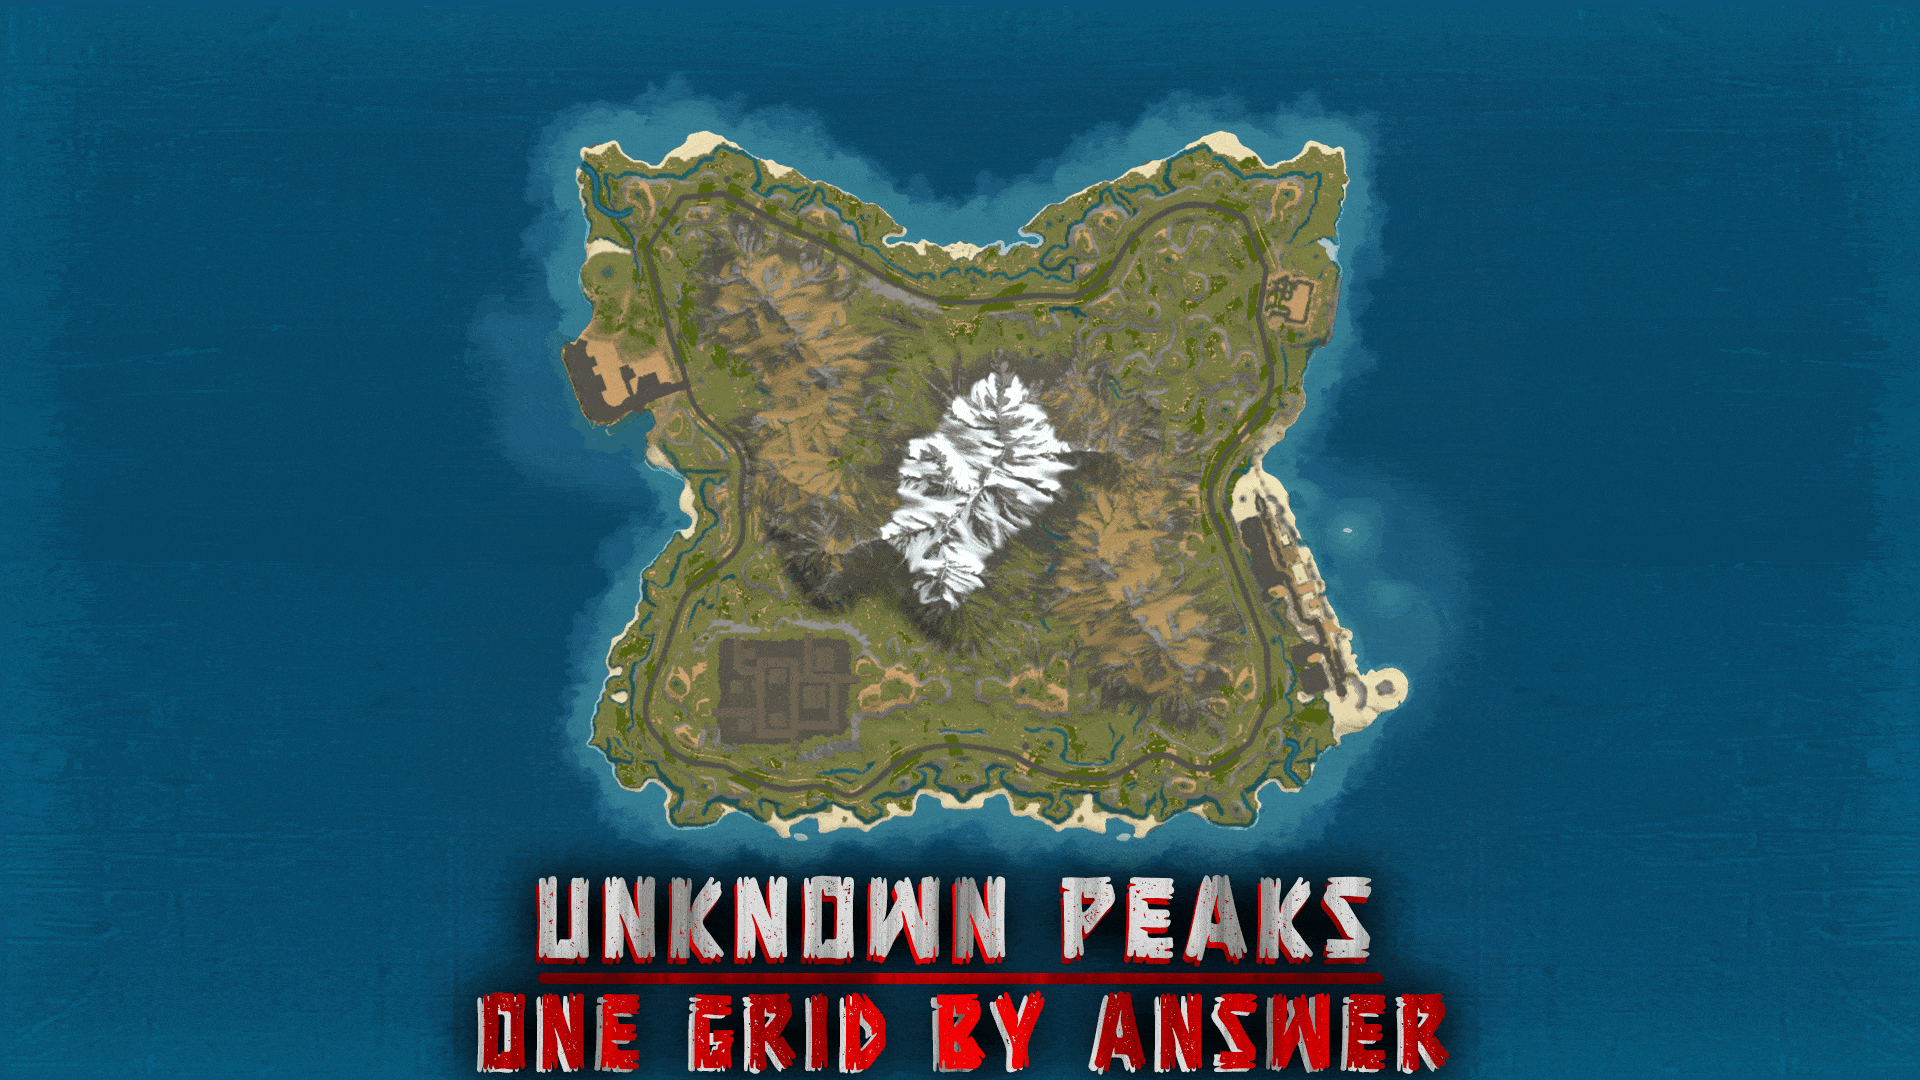 More information about "Unknown Peaks: ONE GRiD"